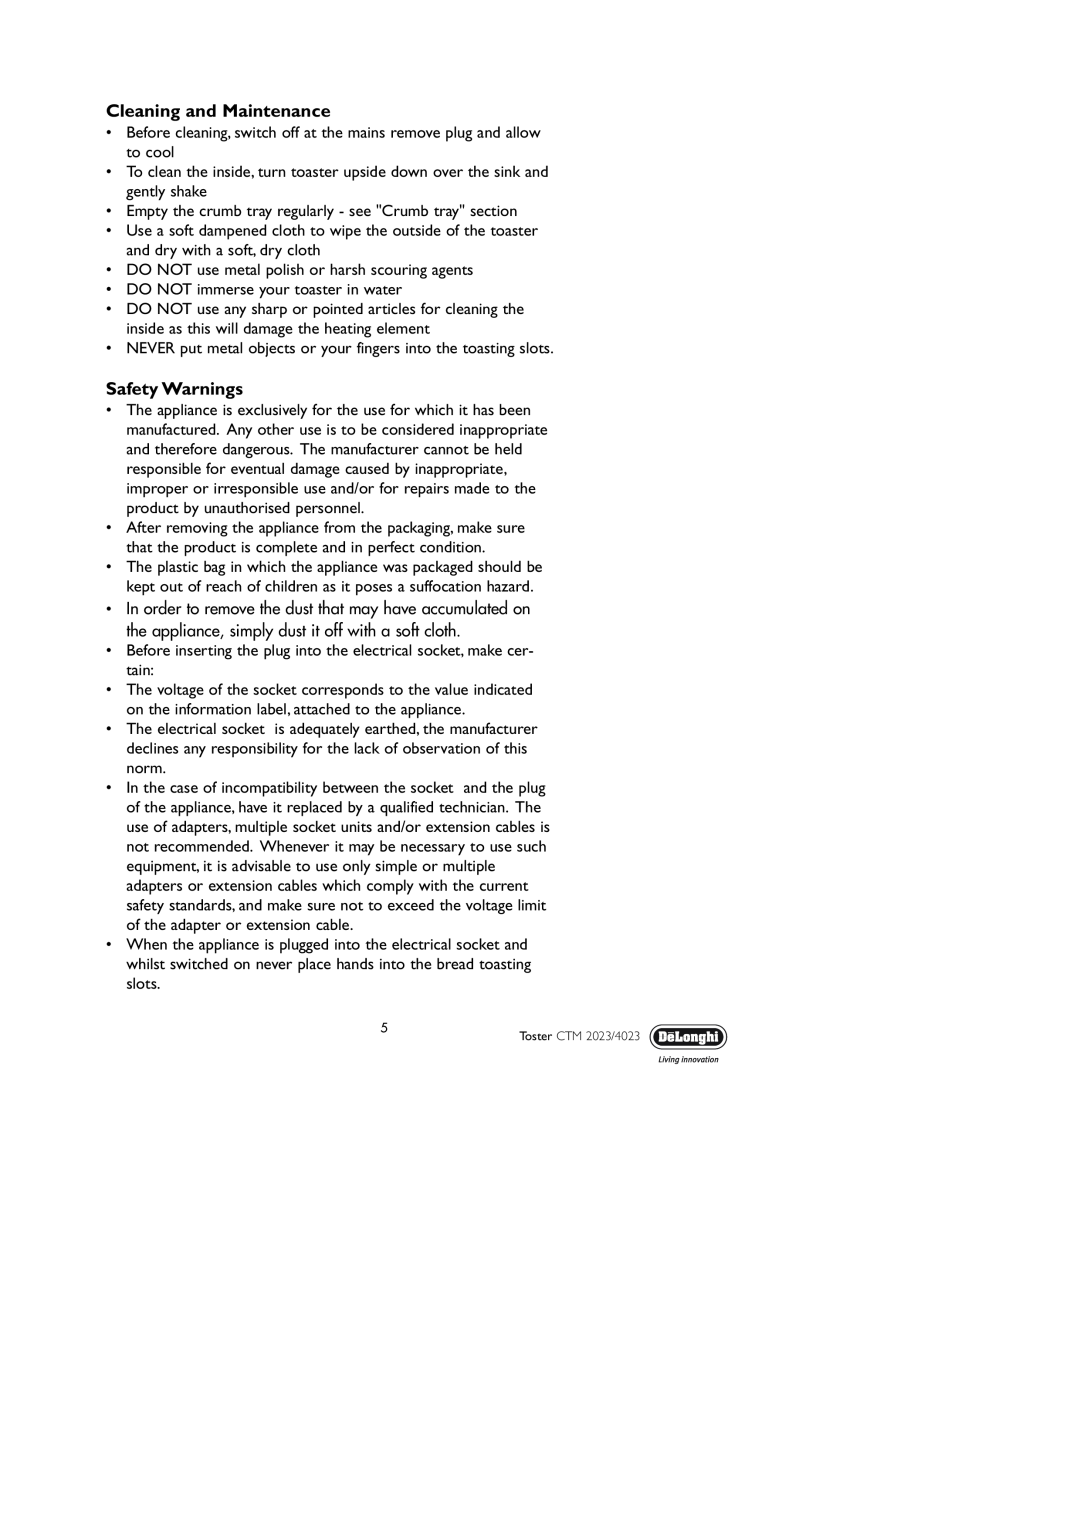 DeLonghi CTM 2023, CTM 4023 manual Cleaning and Maintenance, Safety Warnings 